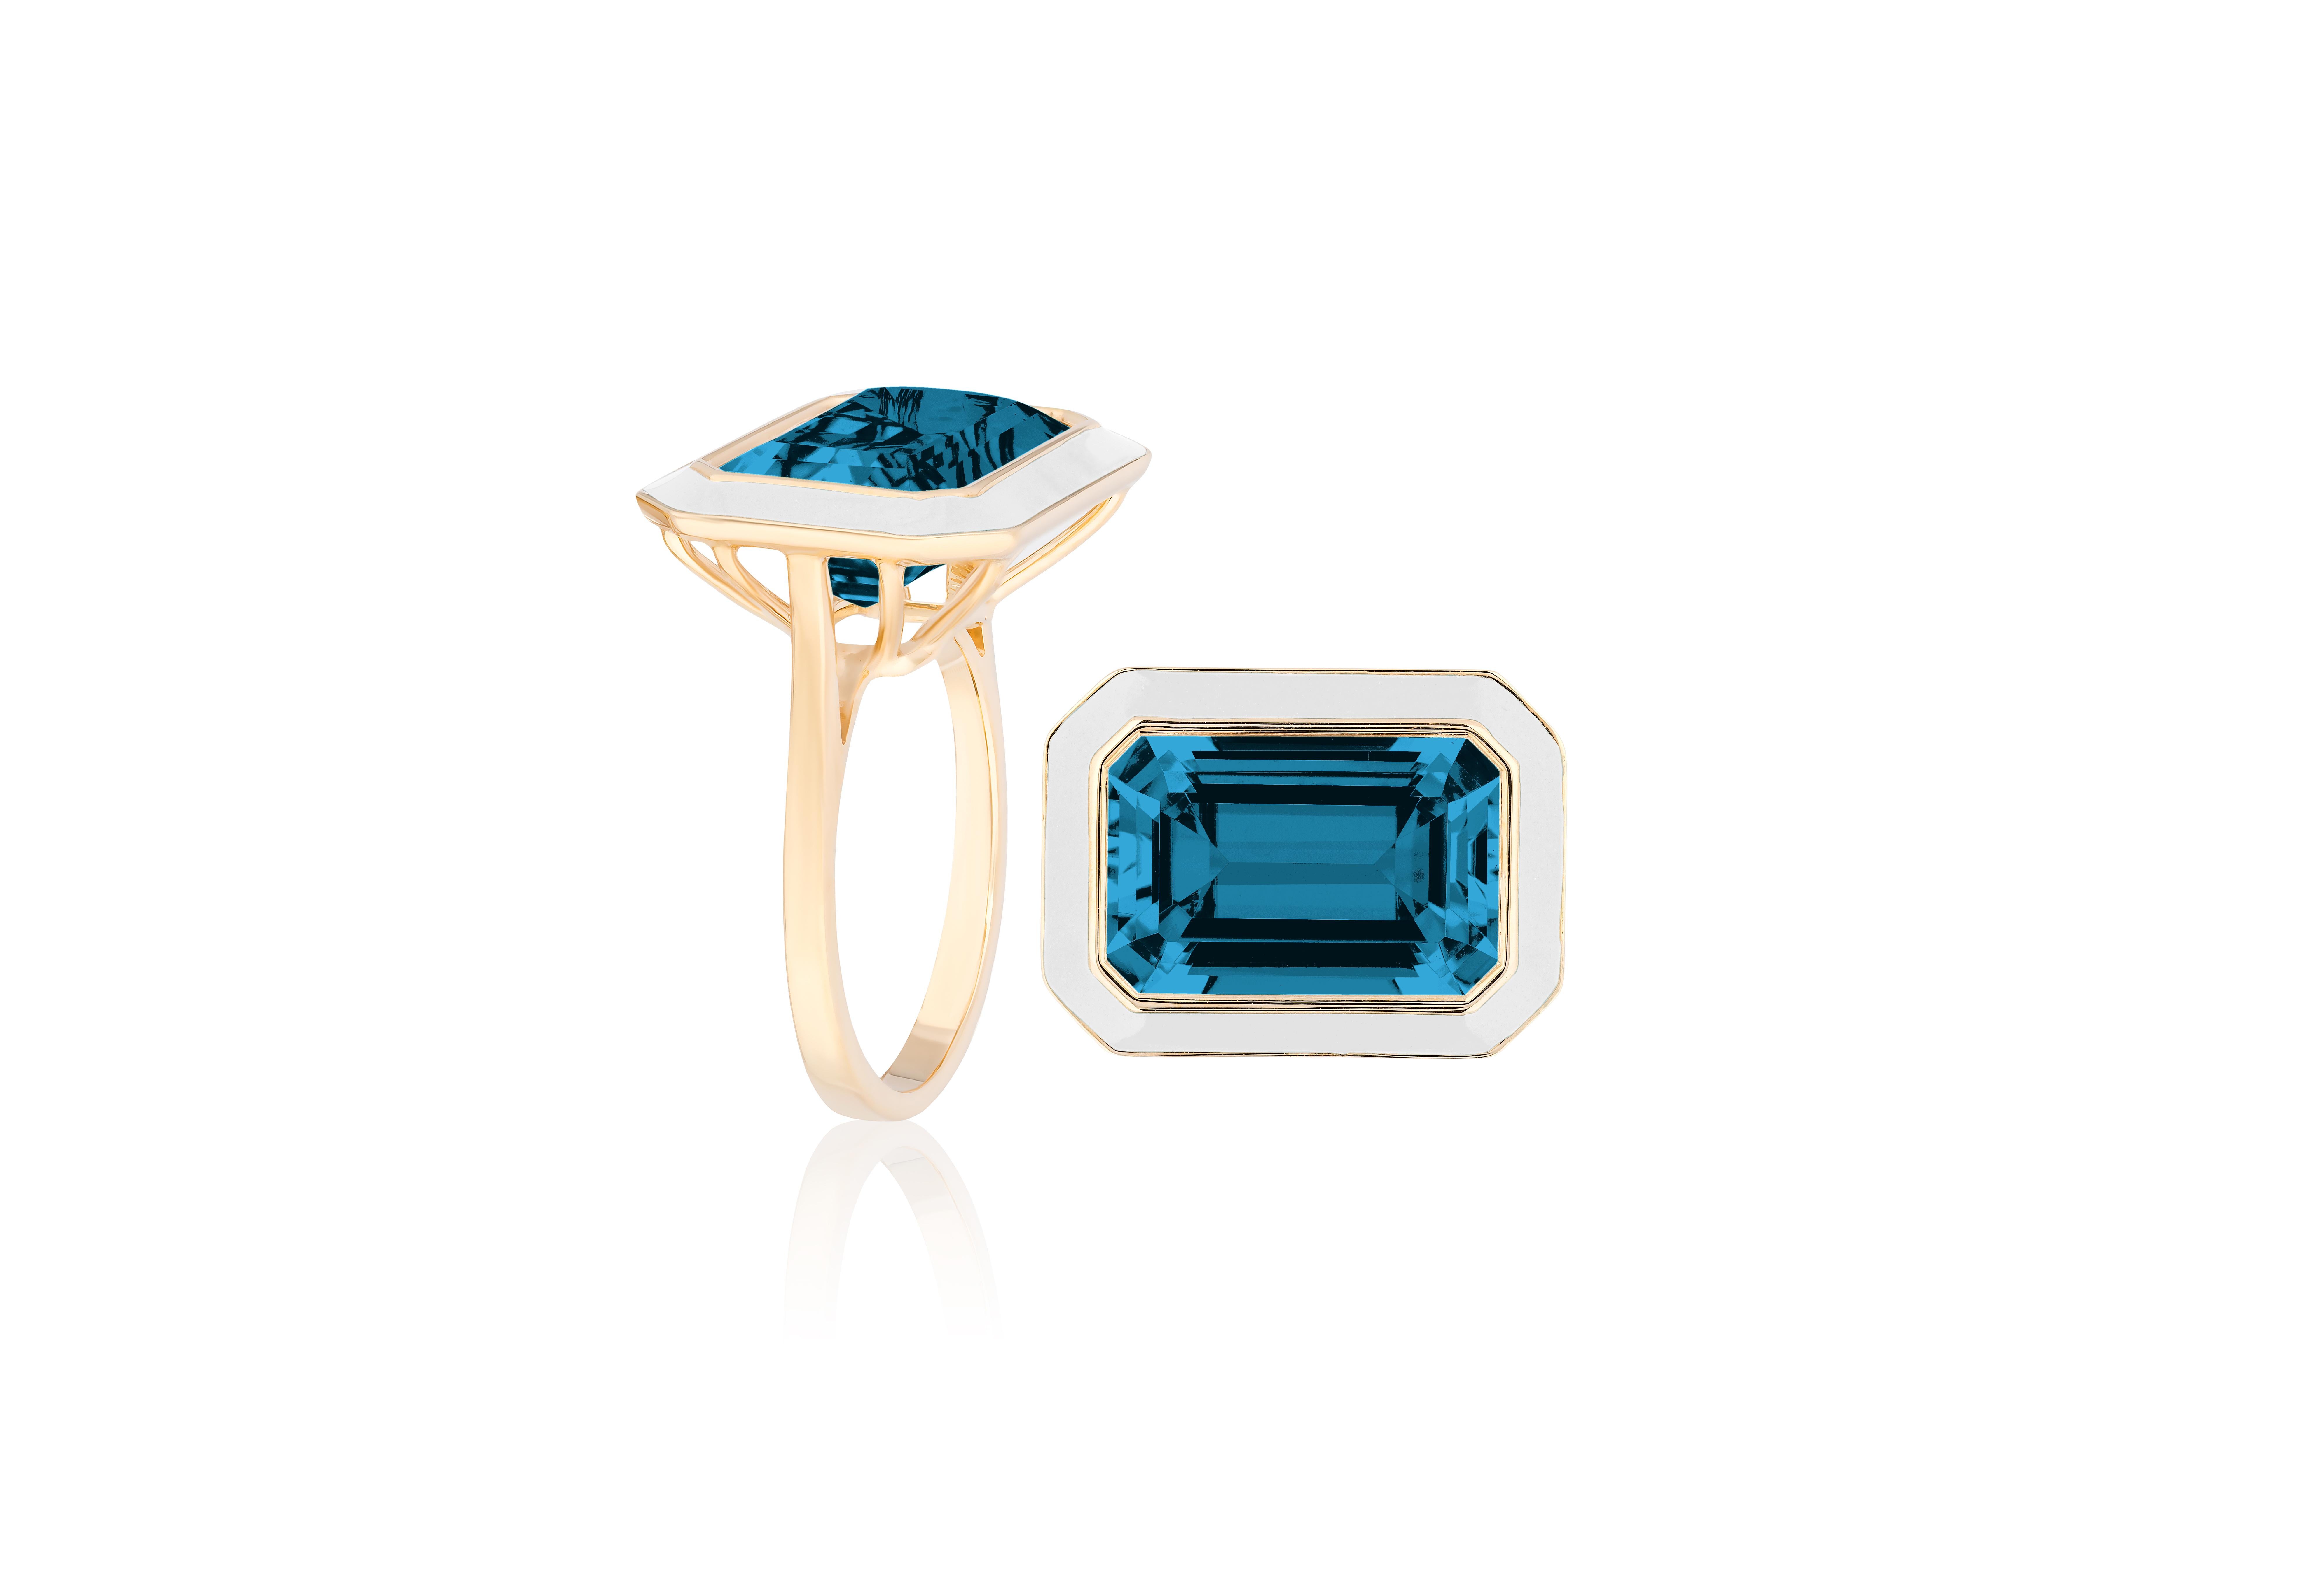 East-West London Blue Topaz Ring with White Enamel in 18K Yellow Gold, from 'Queen' Collection. The combination of enamel and London Blue Topaz represents power, richness and passion of a true Queen. The feeling of luxury is what we’re aiming for.